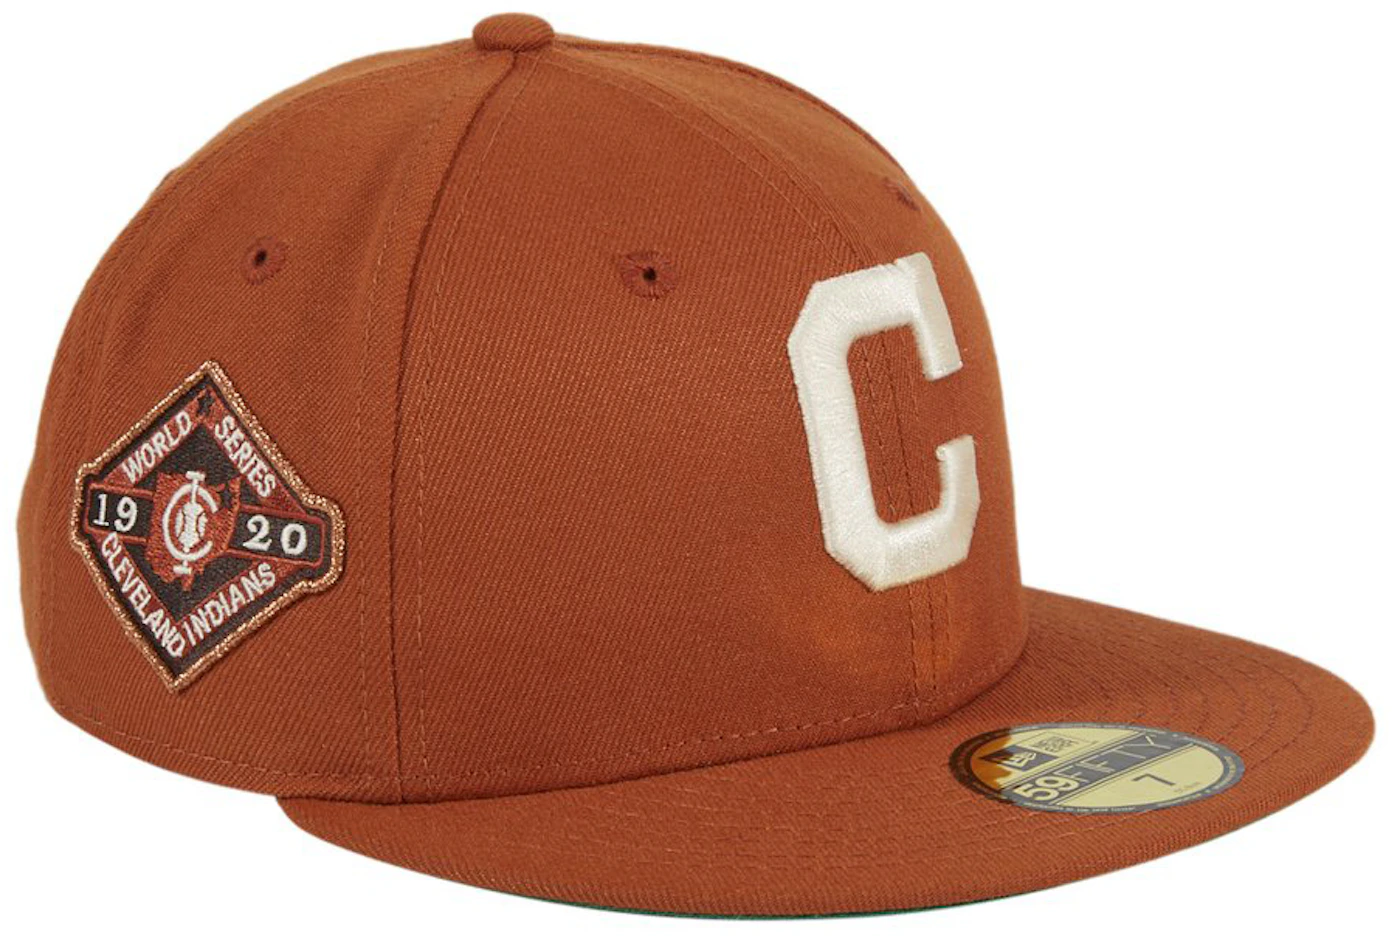 Cleveland Indians New Era 1920 World Series Champions Red